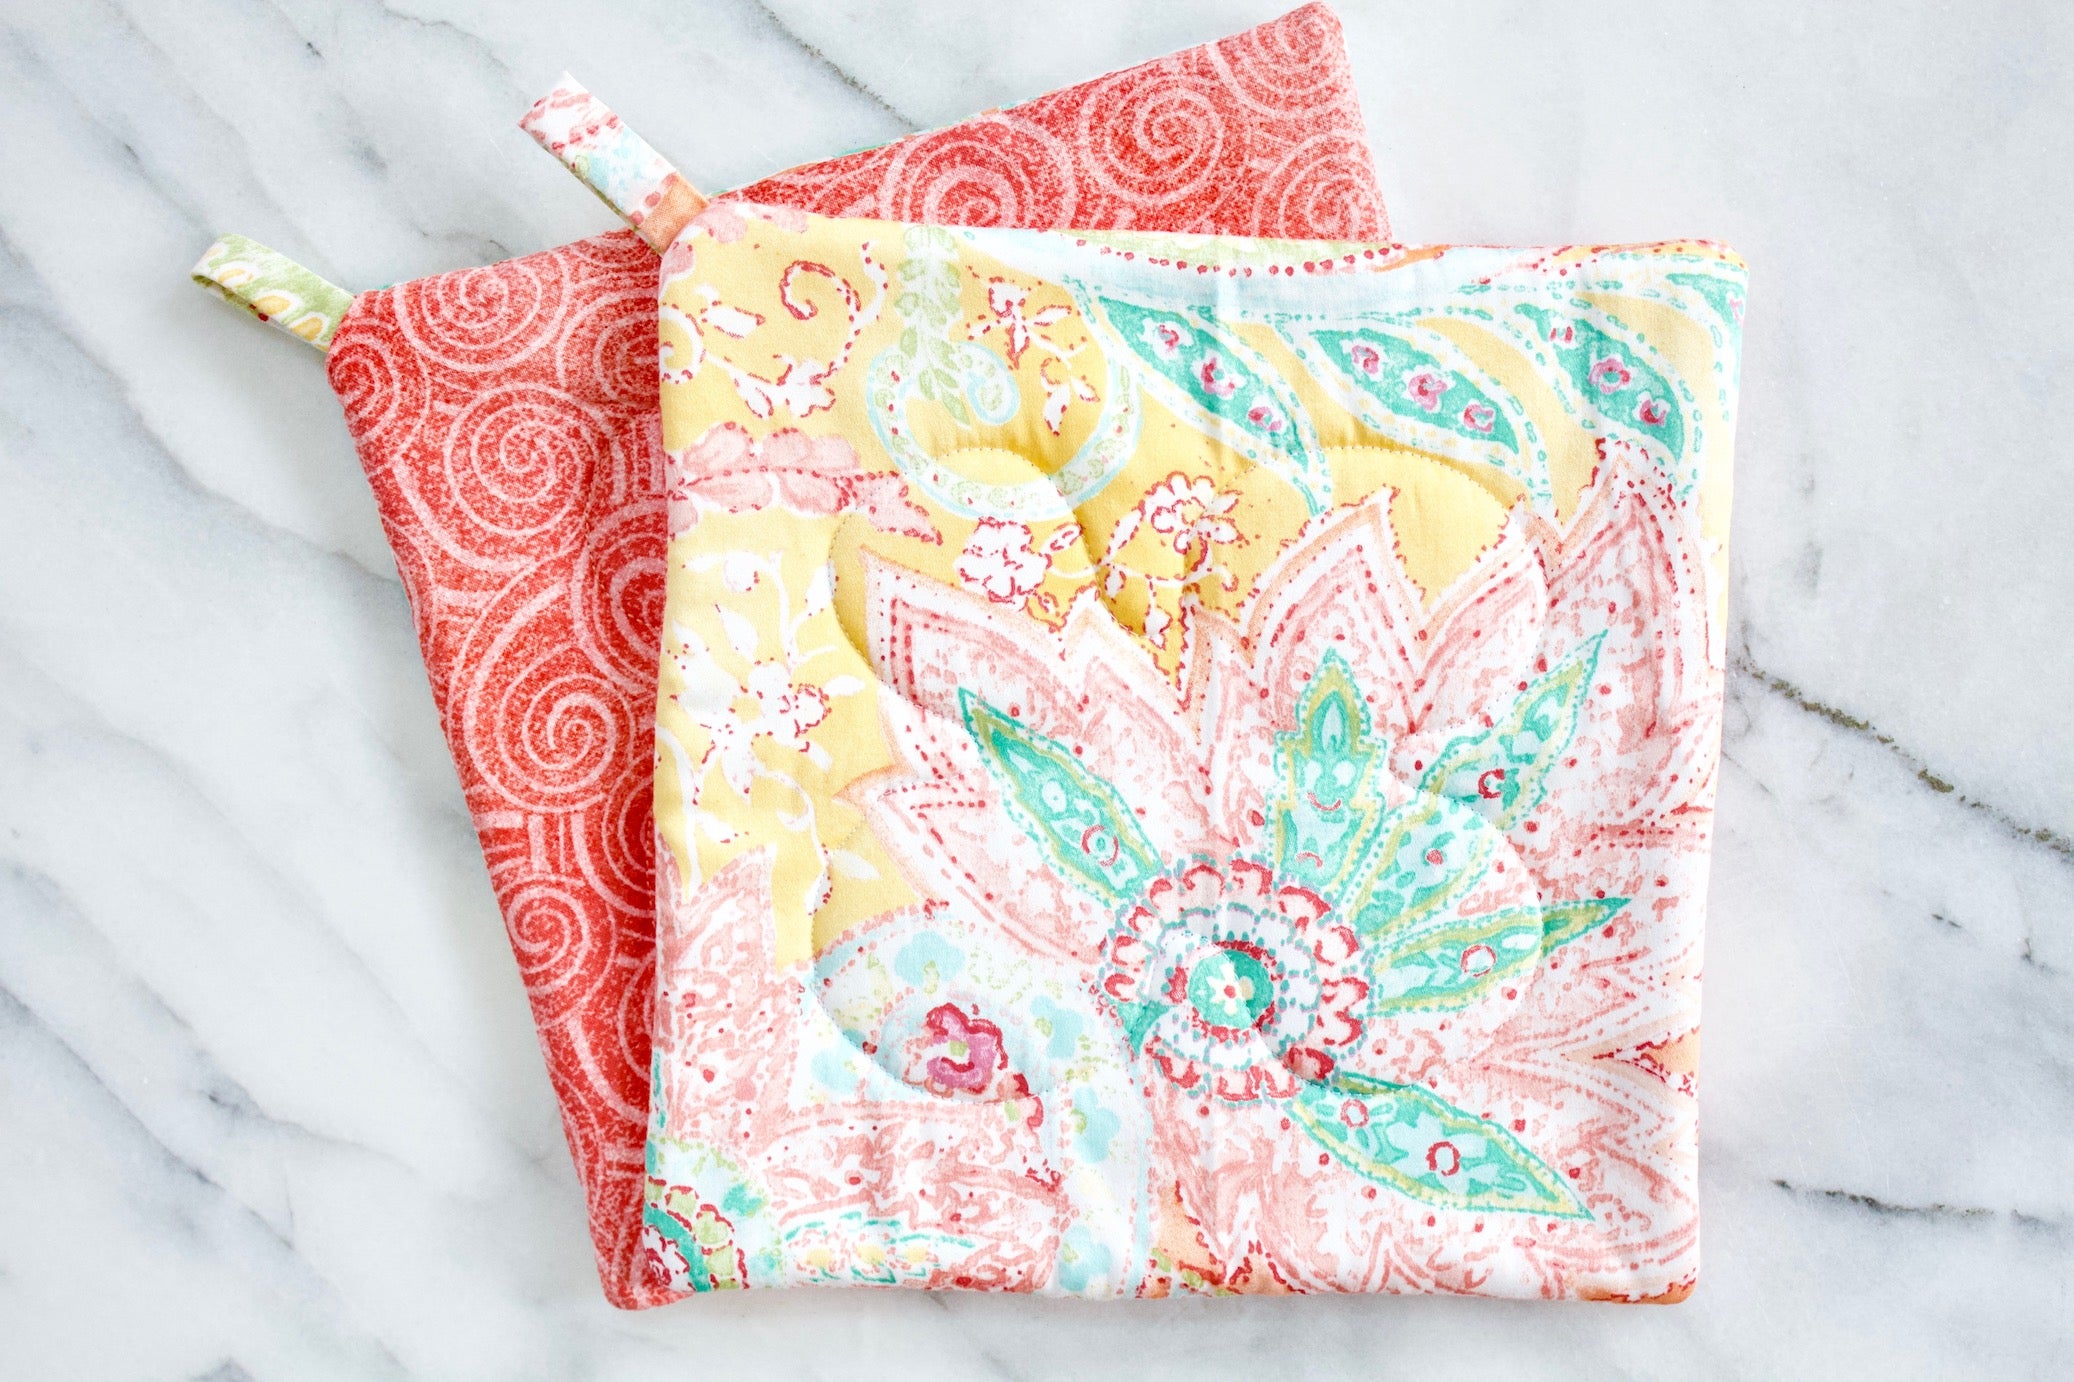 Paisley Sunrise Potholder-The Blue Peony-Category_Pot Holder,Color_Cream,Color_Orange,Color_Pink,Color_Yellow,Department_Kitchen,Pattern_Paisley,Size_Traditional (Square)